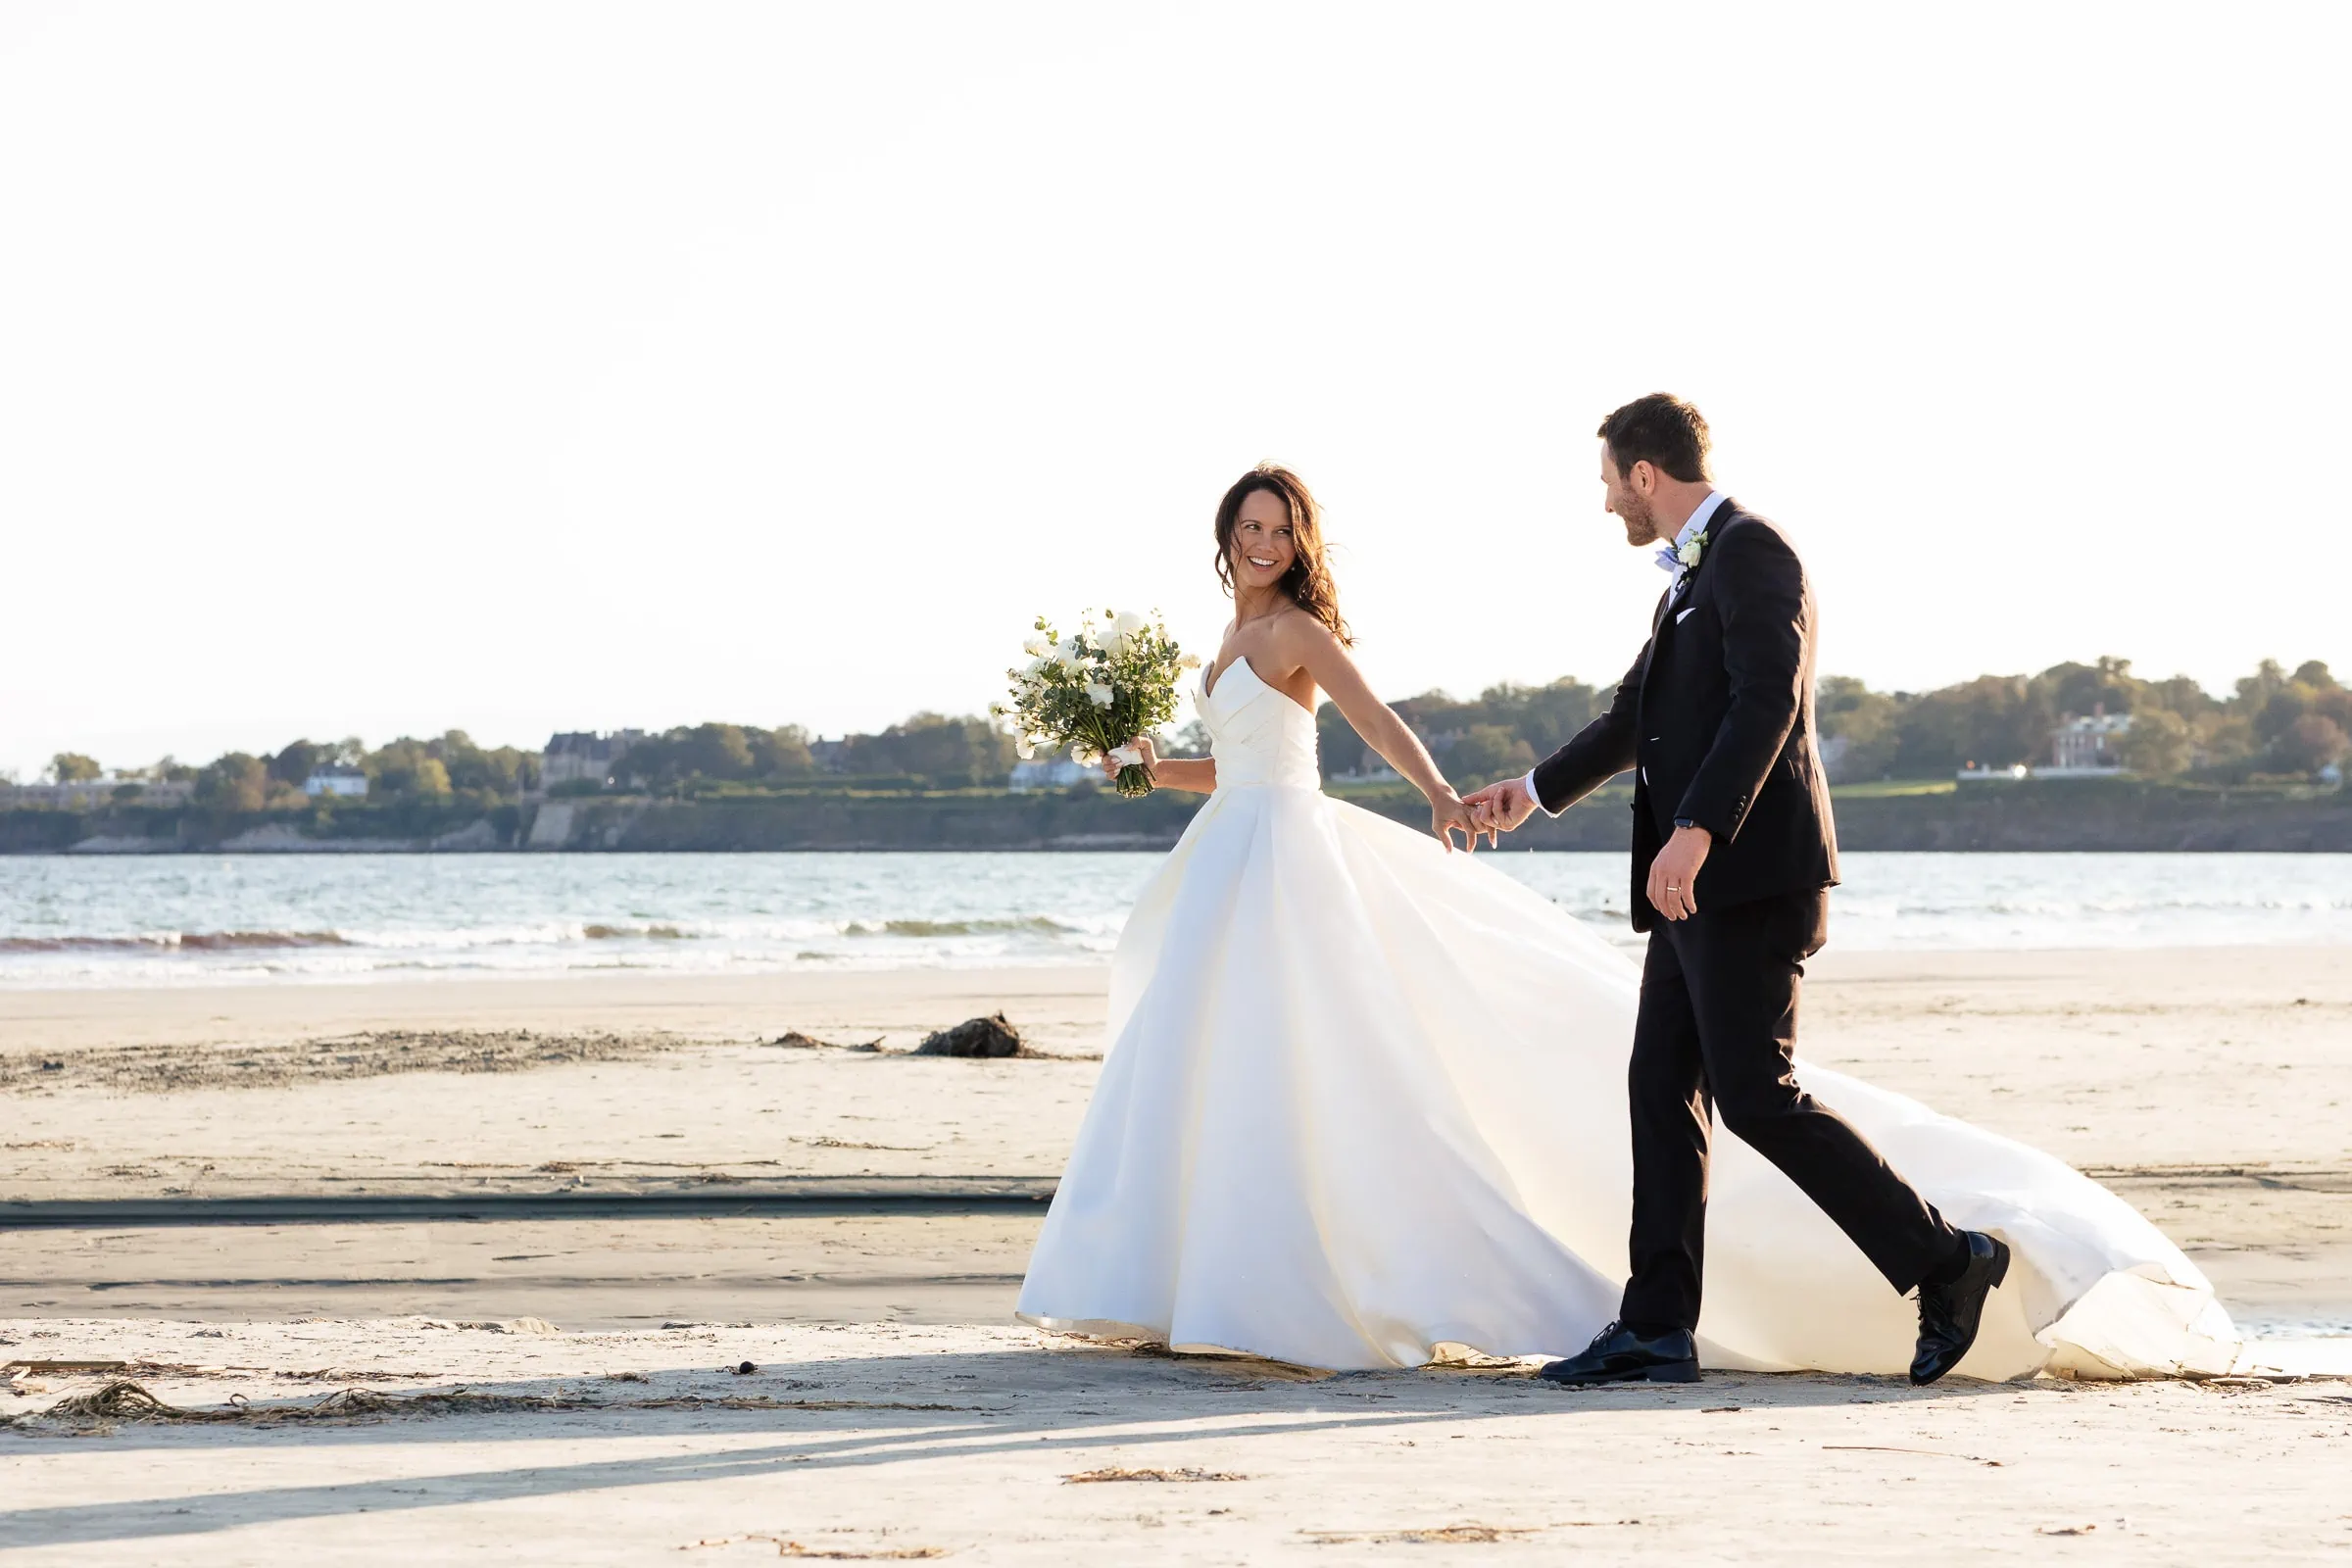 A bride looks back smiling at her groom as they walk hand in hand across the beach